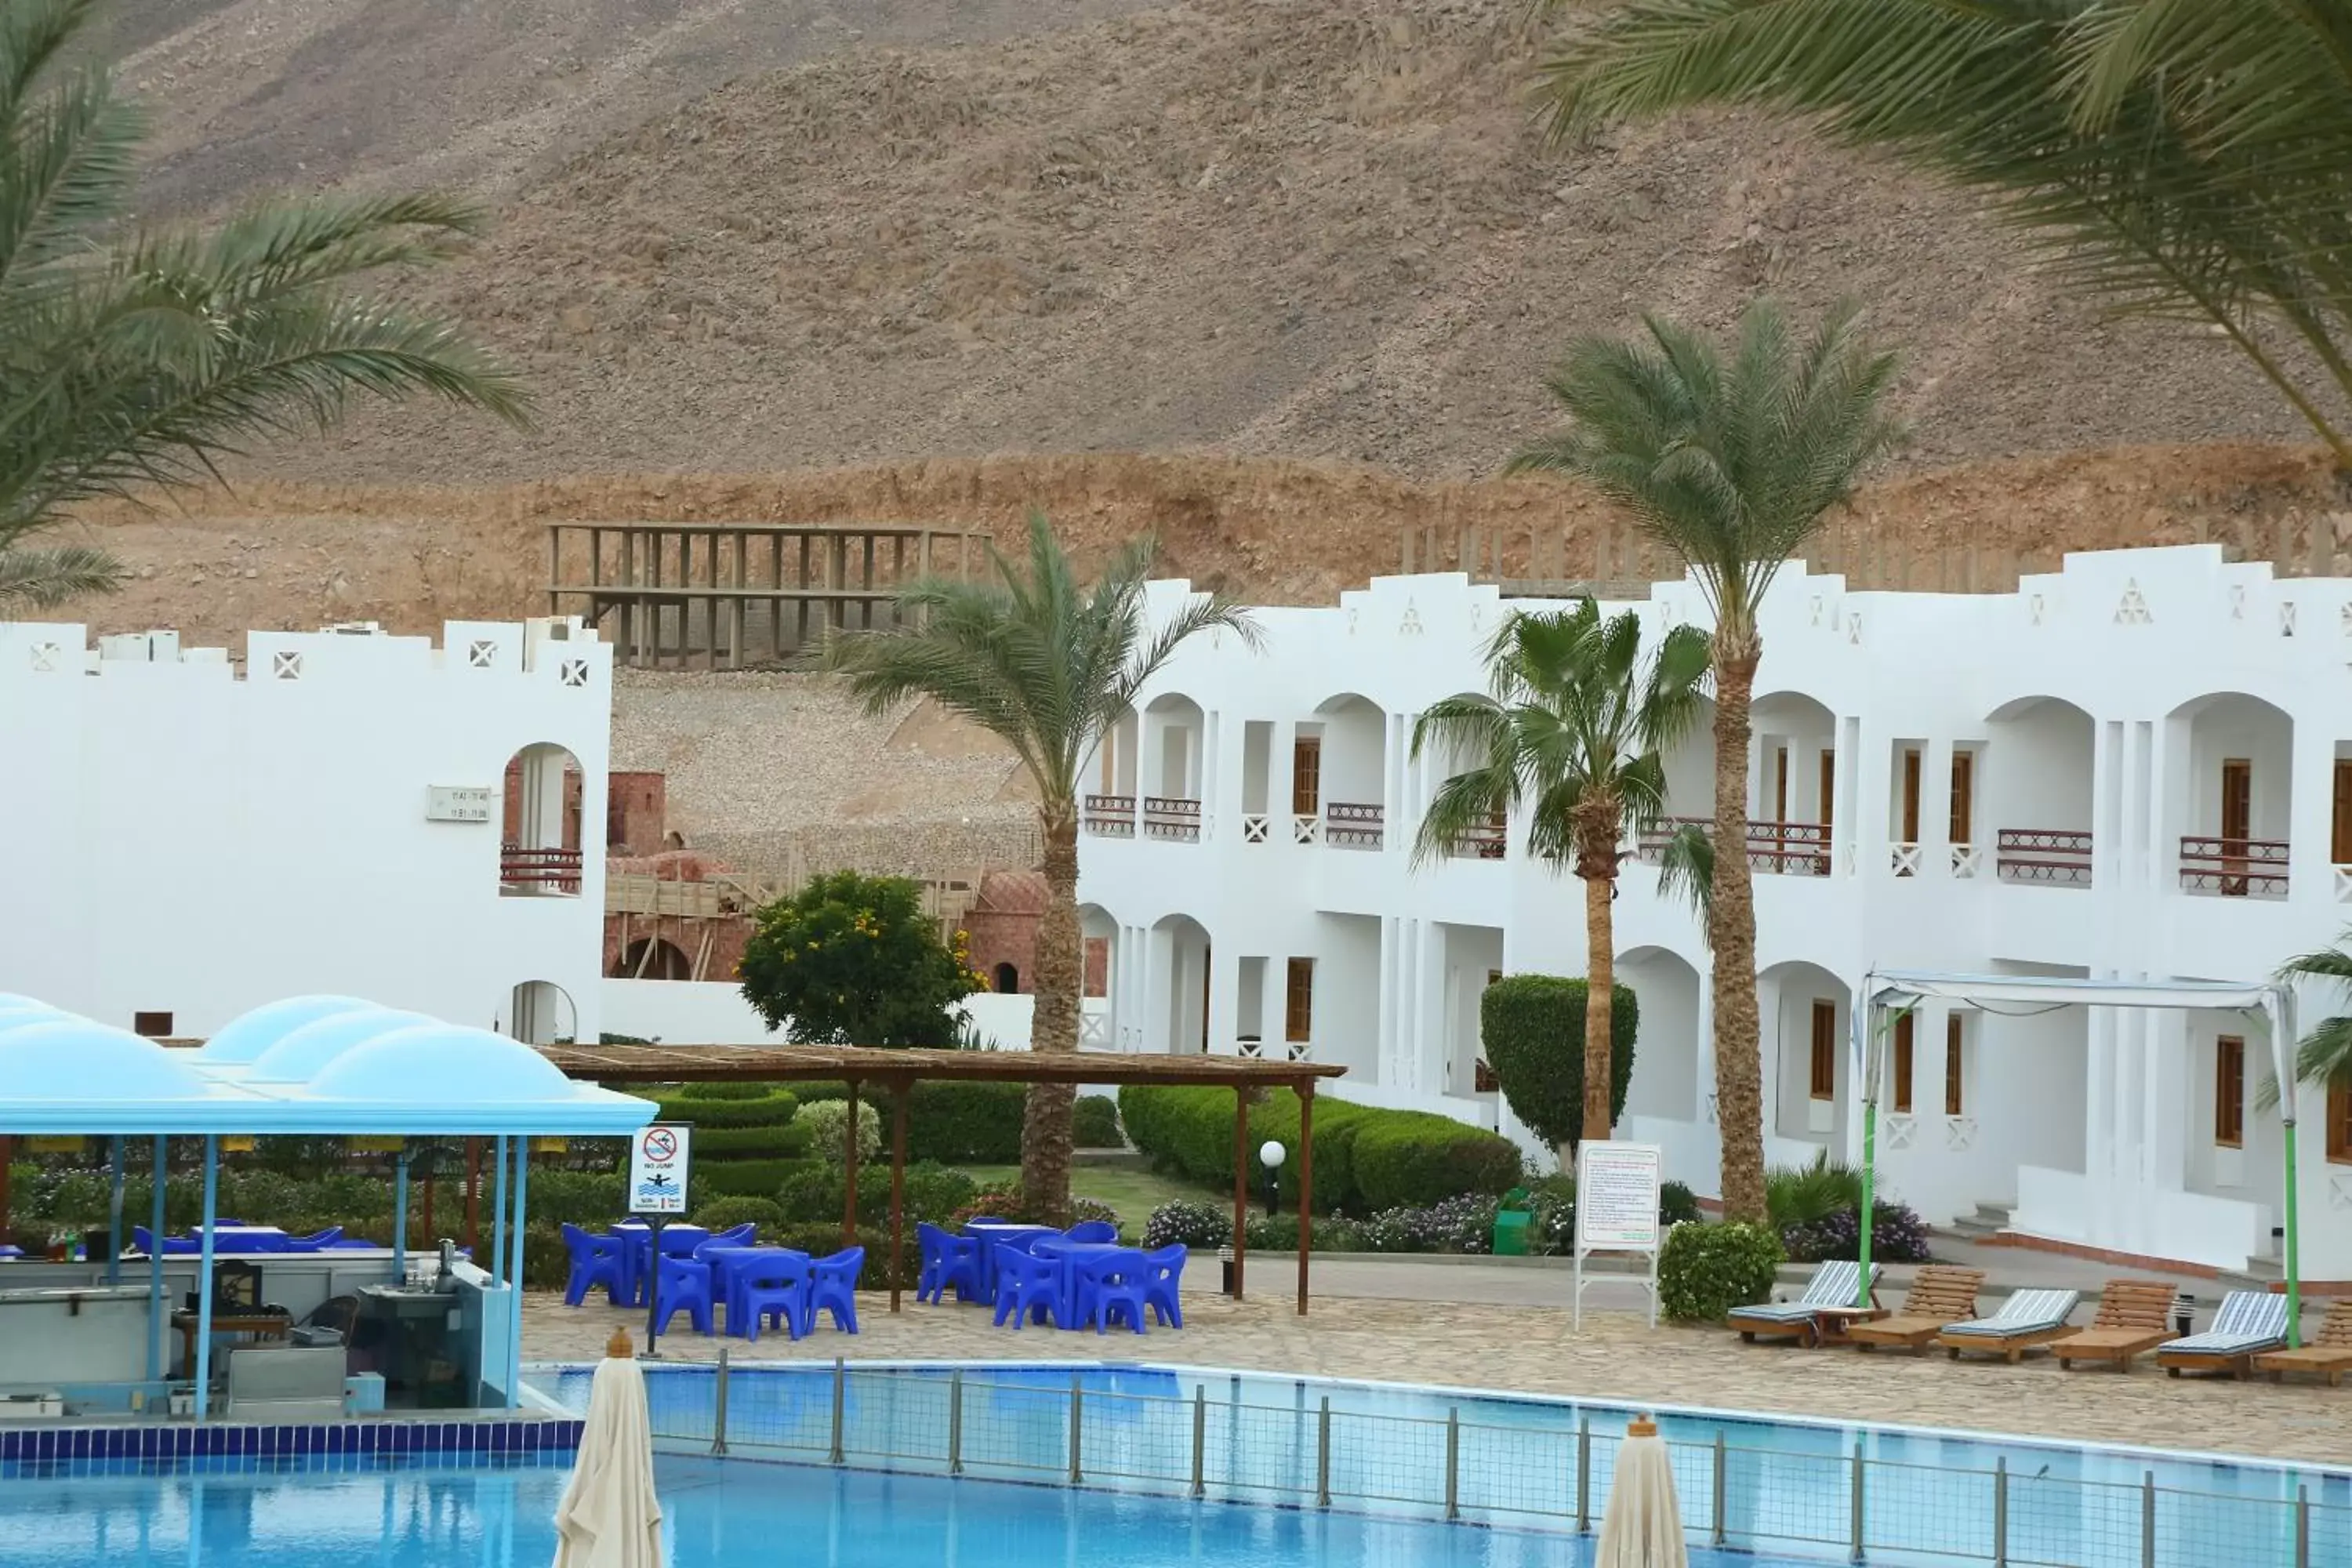 Property building, Swimming Pool in Happy Life Village Dahab